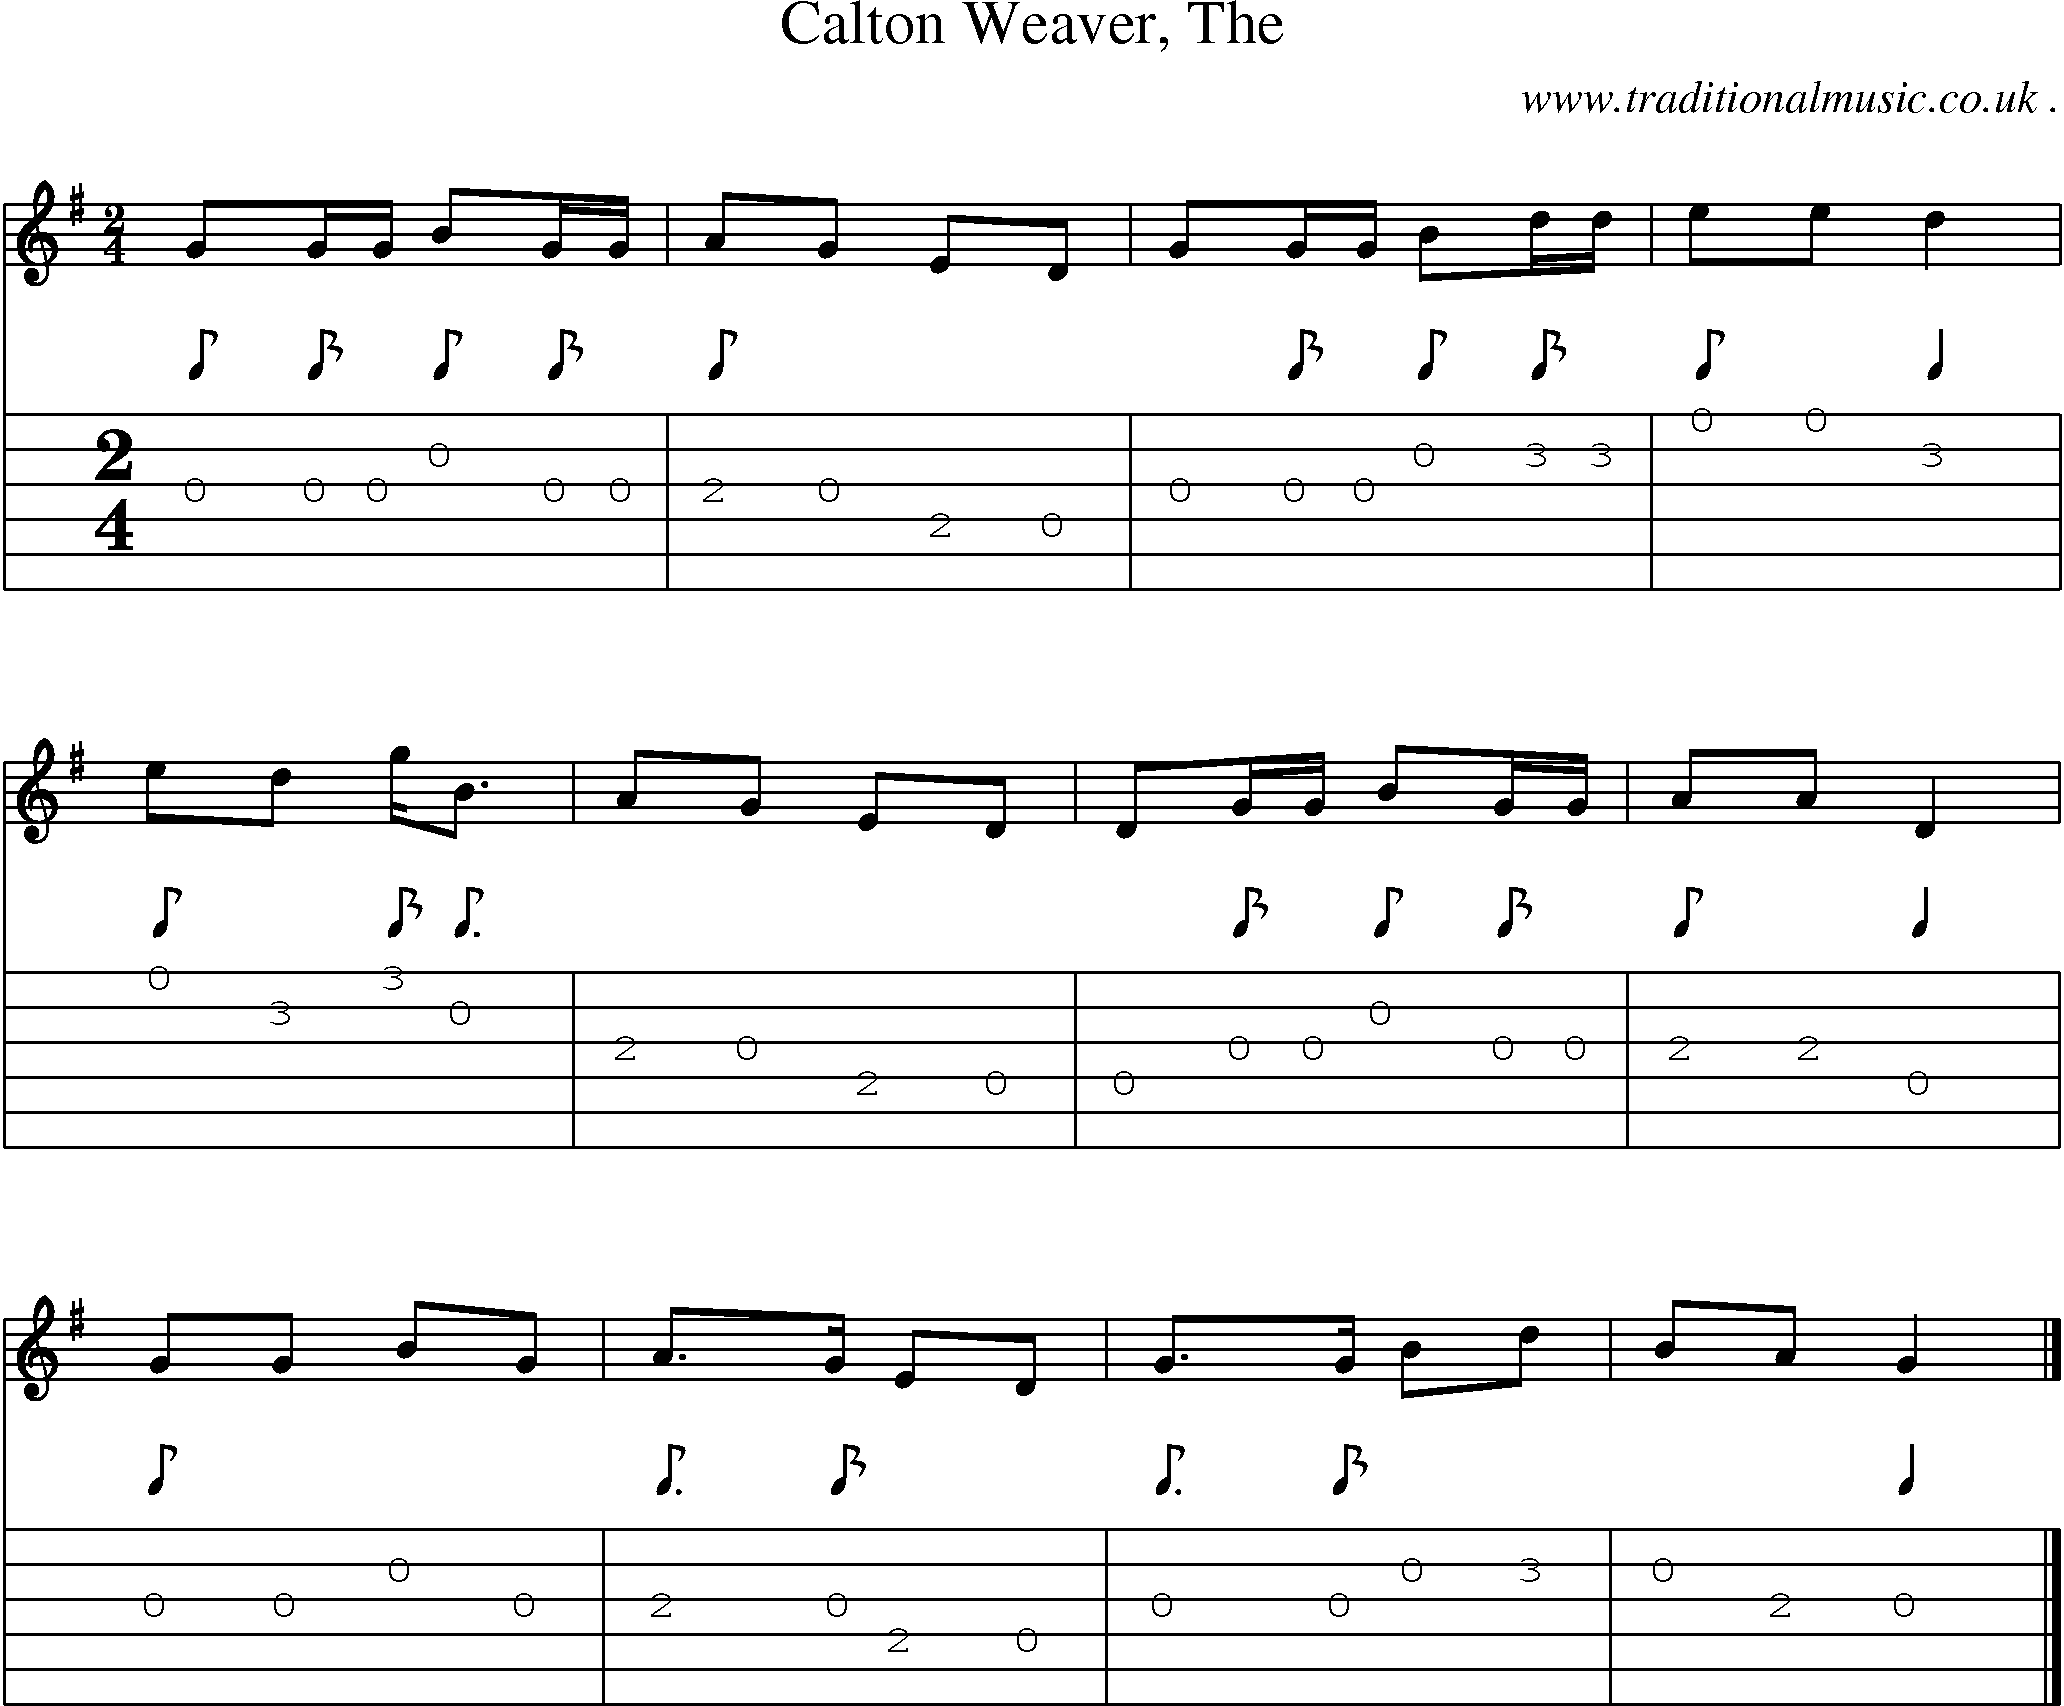 Sheet-music  score, Chords and Guitar Tabs for Calton Weaver The